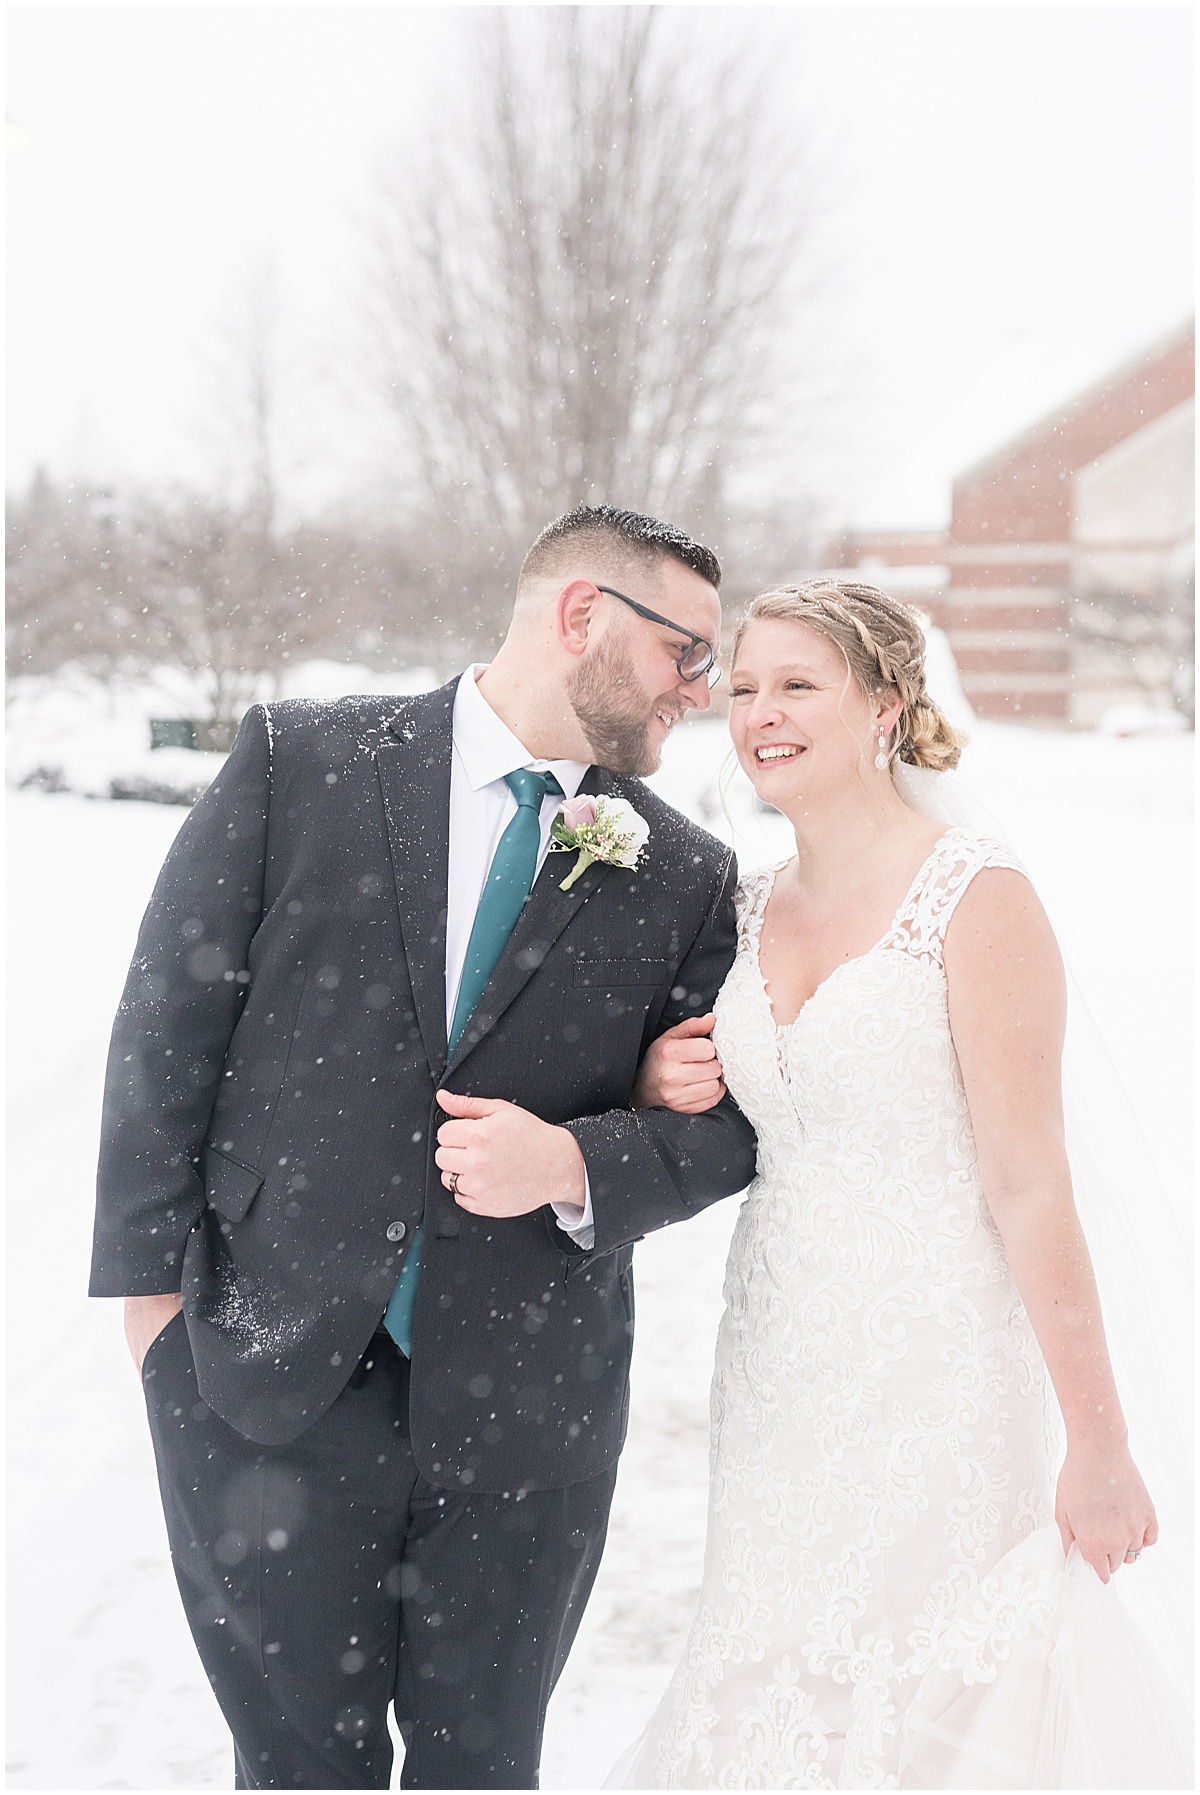 Wedding photos in the snow at Trinity Christian College in Chicago, Illinois